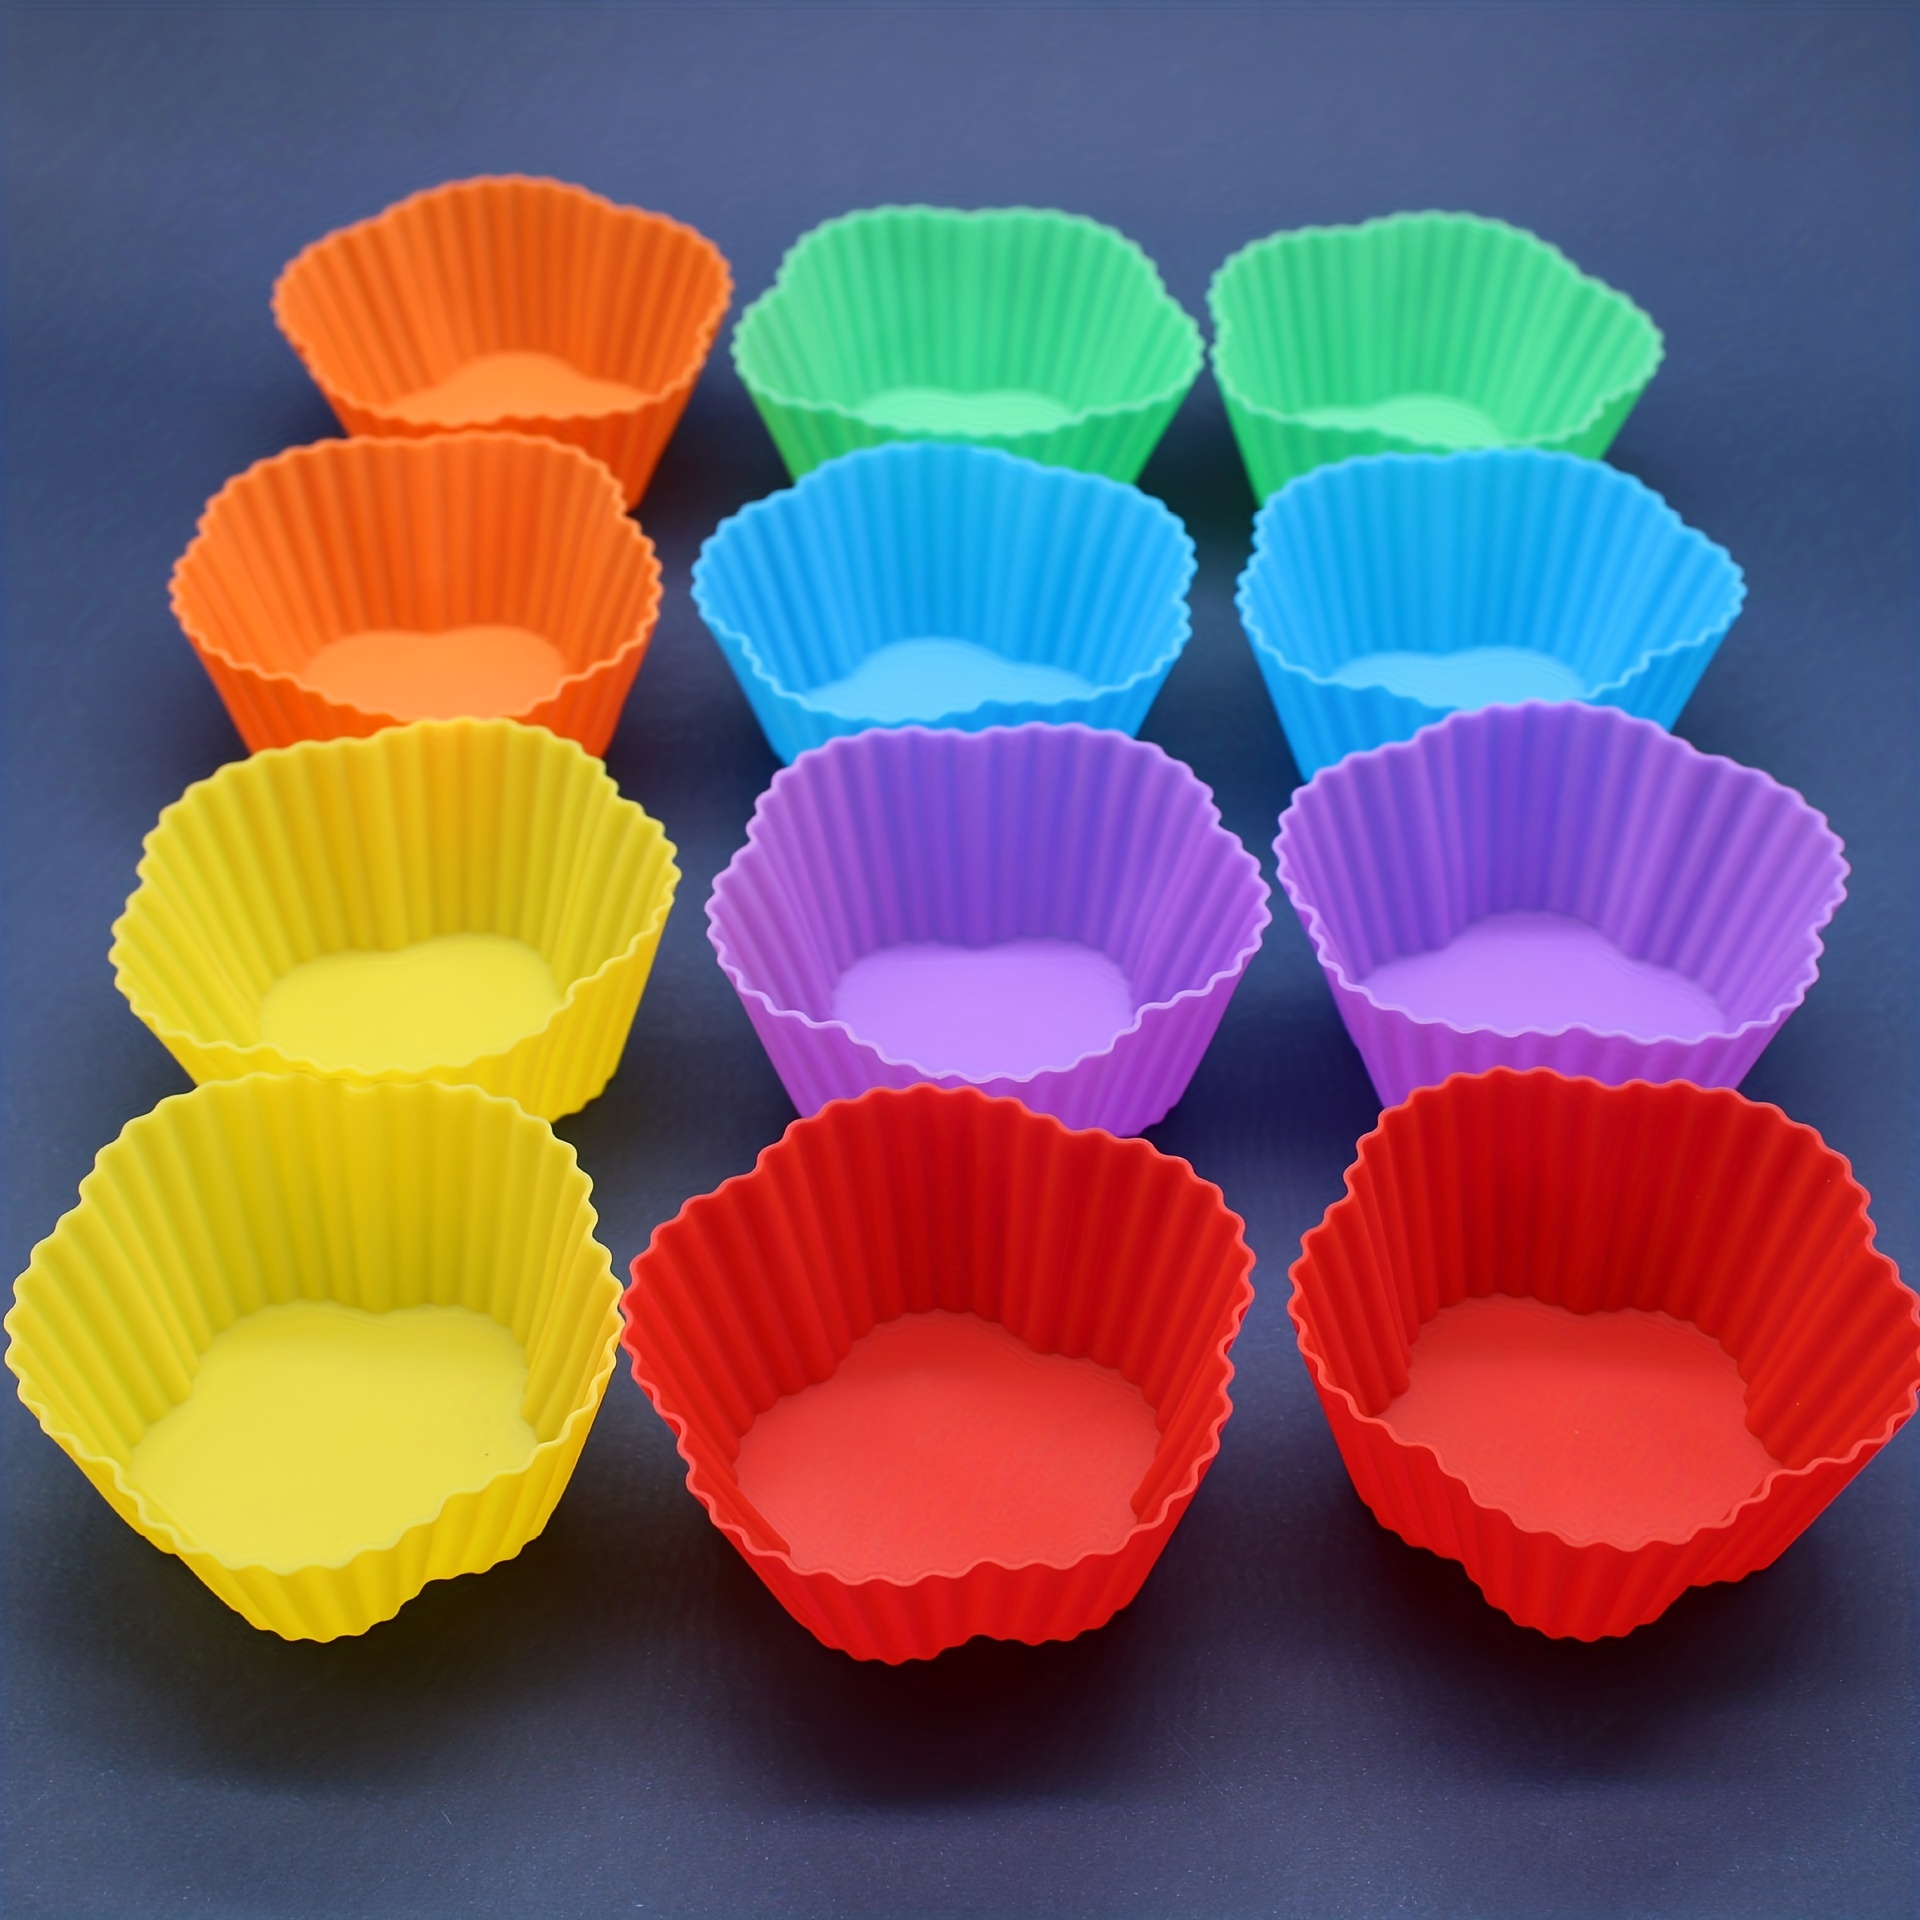 Silicone Cake Mold Round Shaped Muffin Cupcake Baking Molds